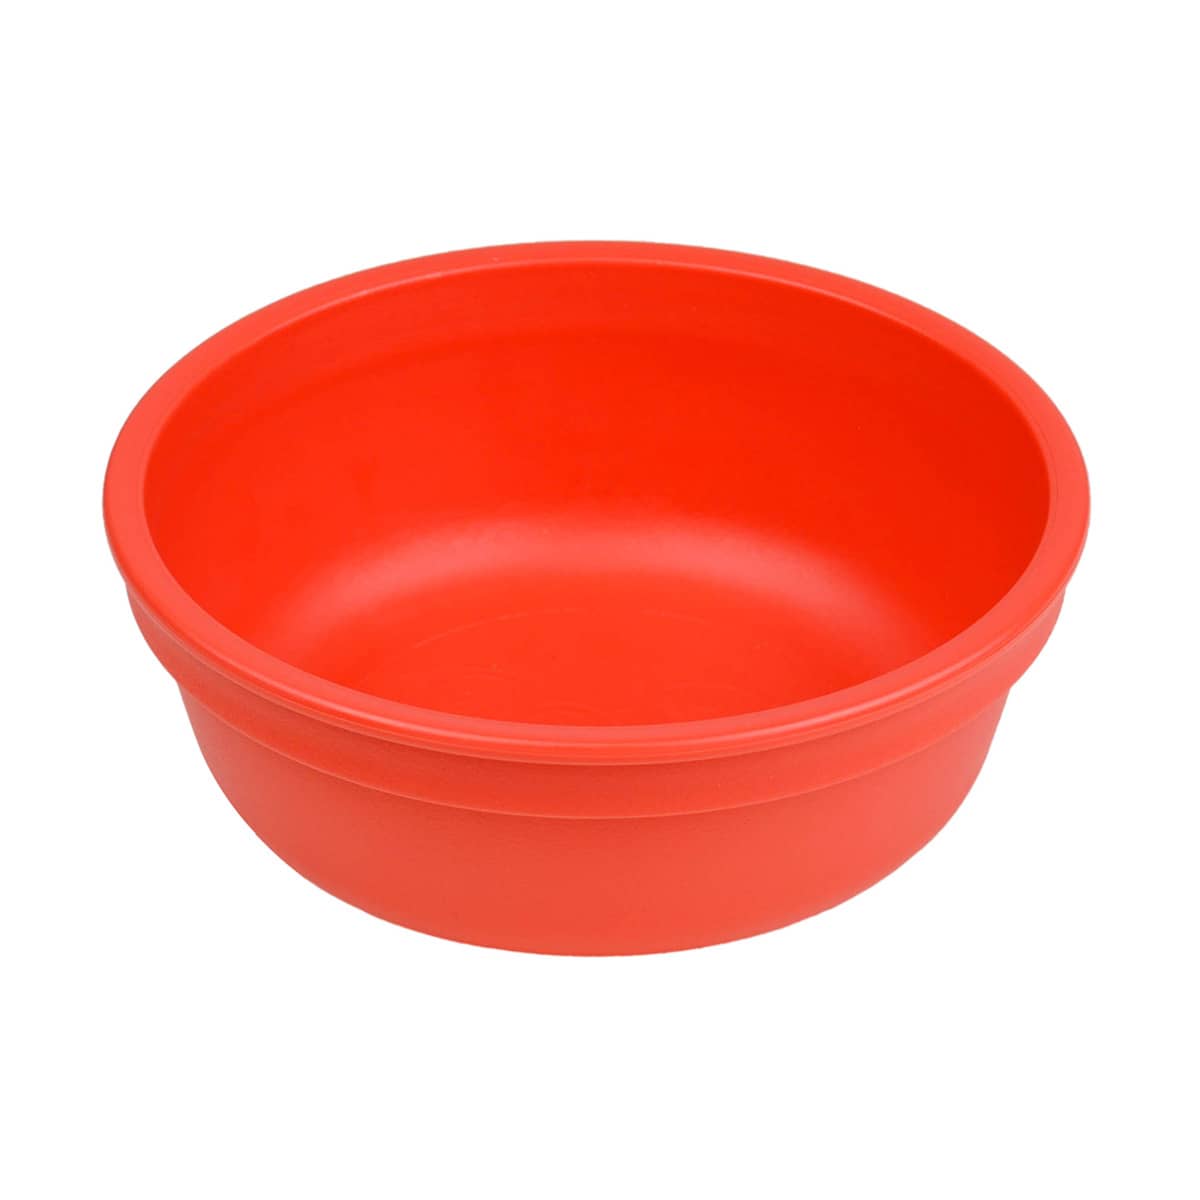 Re-Play Recycled Bowl - Red